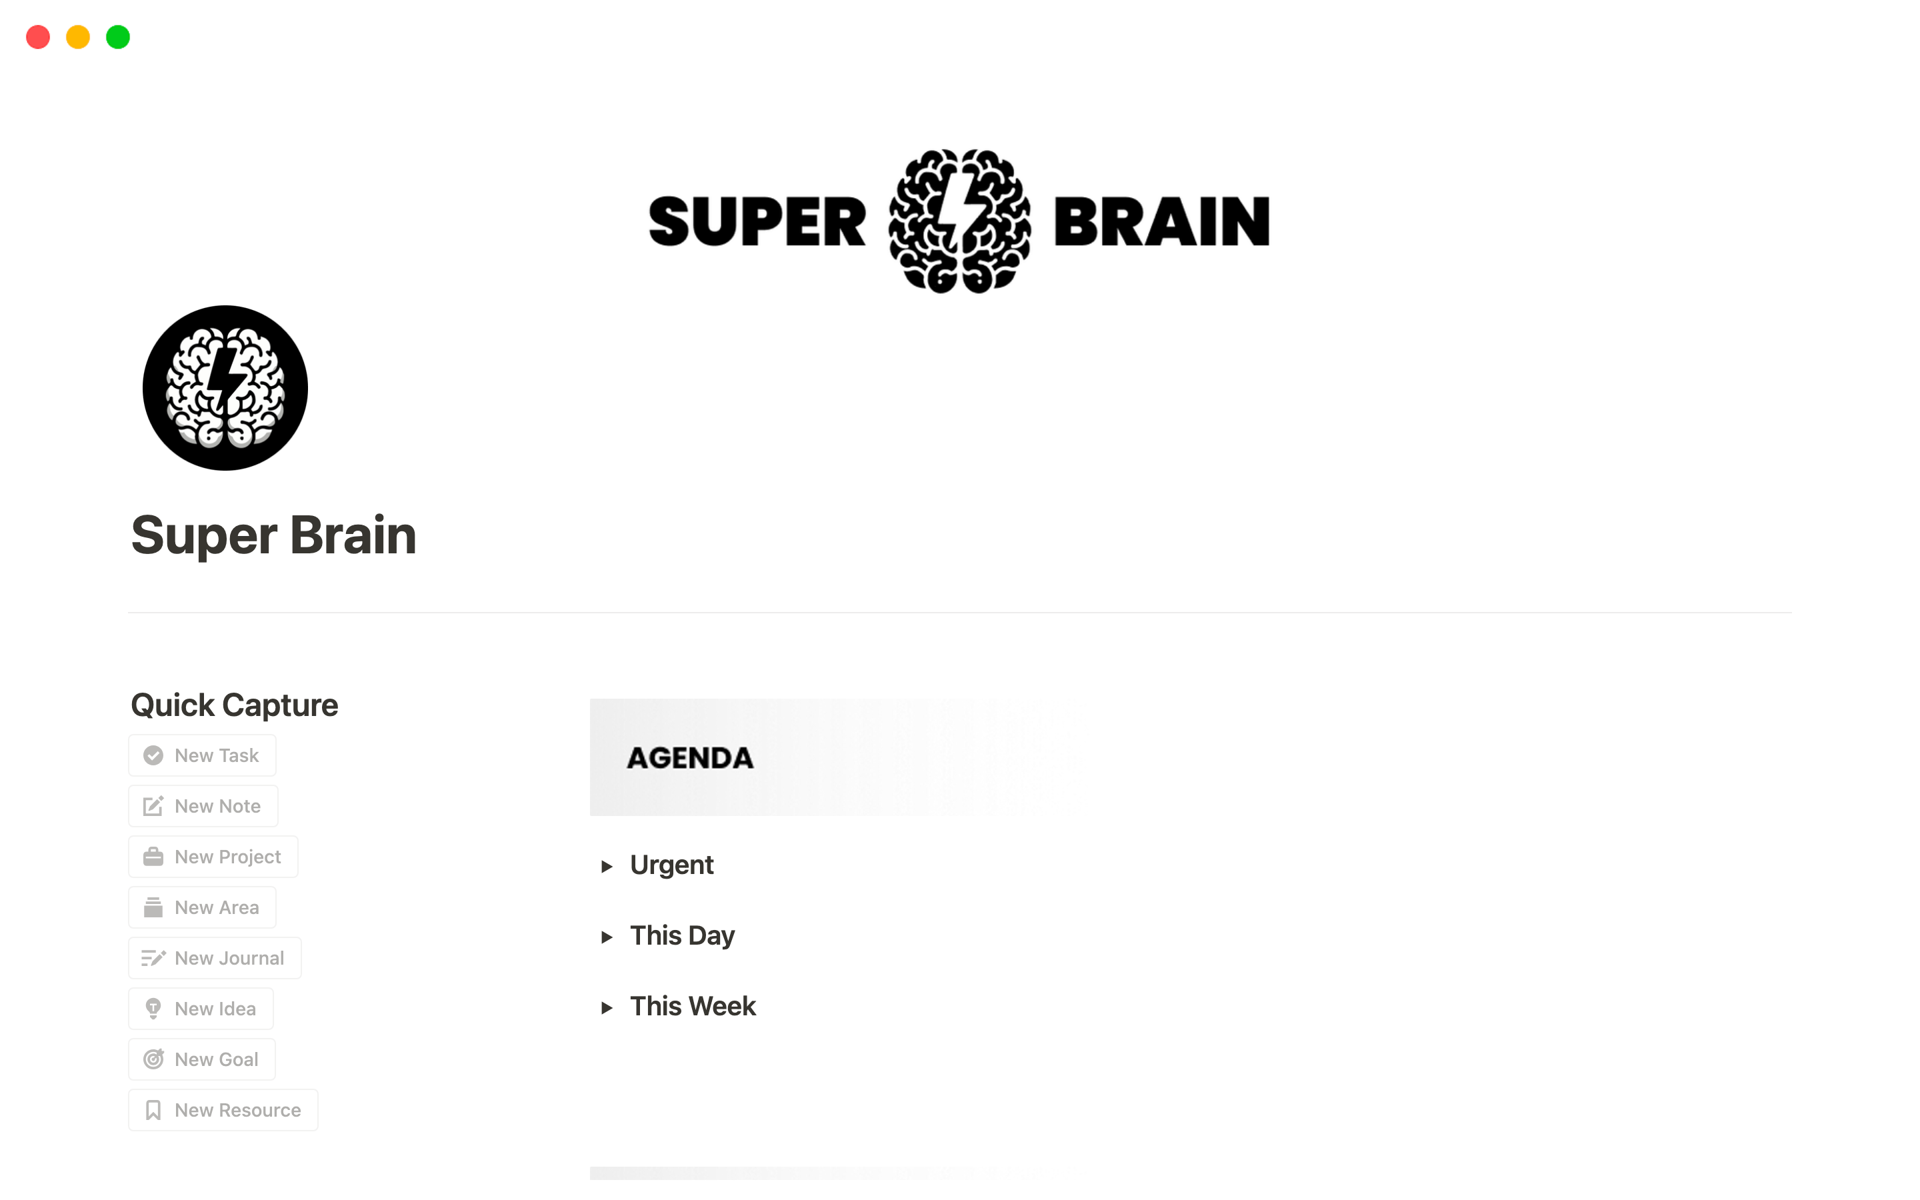 Have you ever felt overwhelmed by the chaos of daily tasks, projects, and ideas? Do you find yourself struggling to keep track of your personal and professional life? Introducing Super Brain for Notion